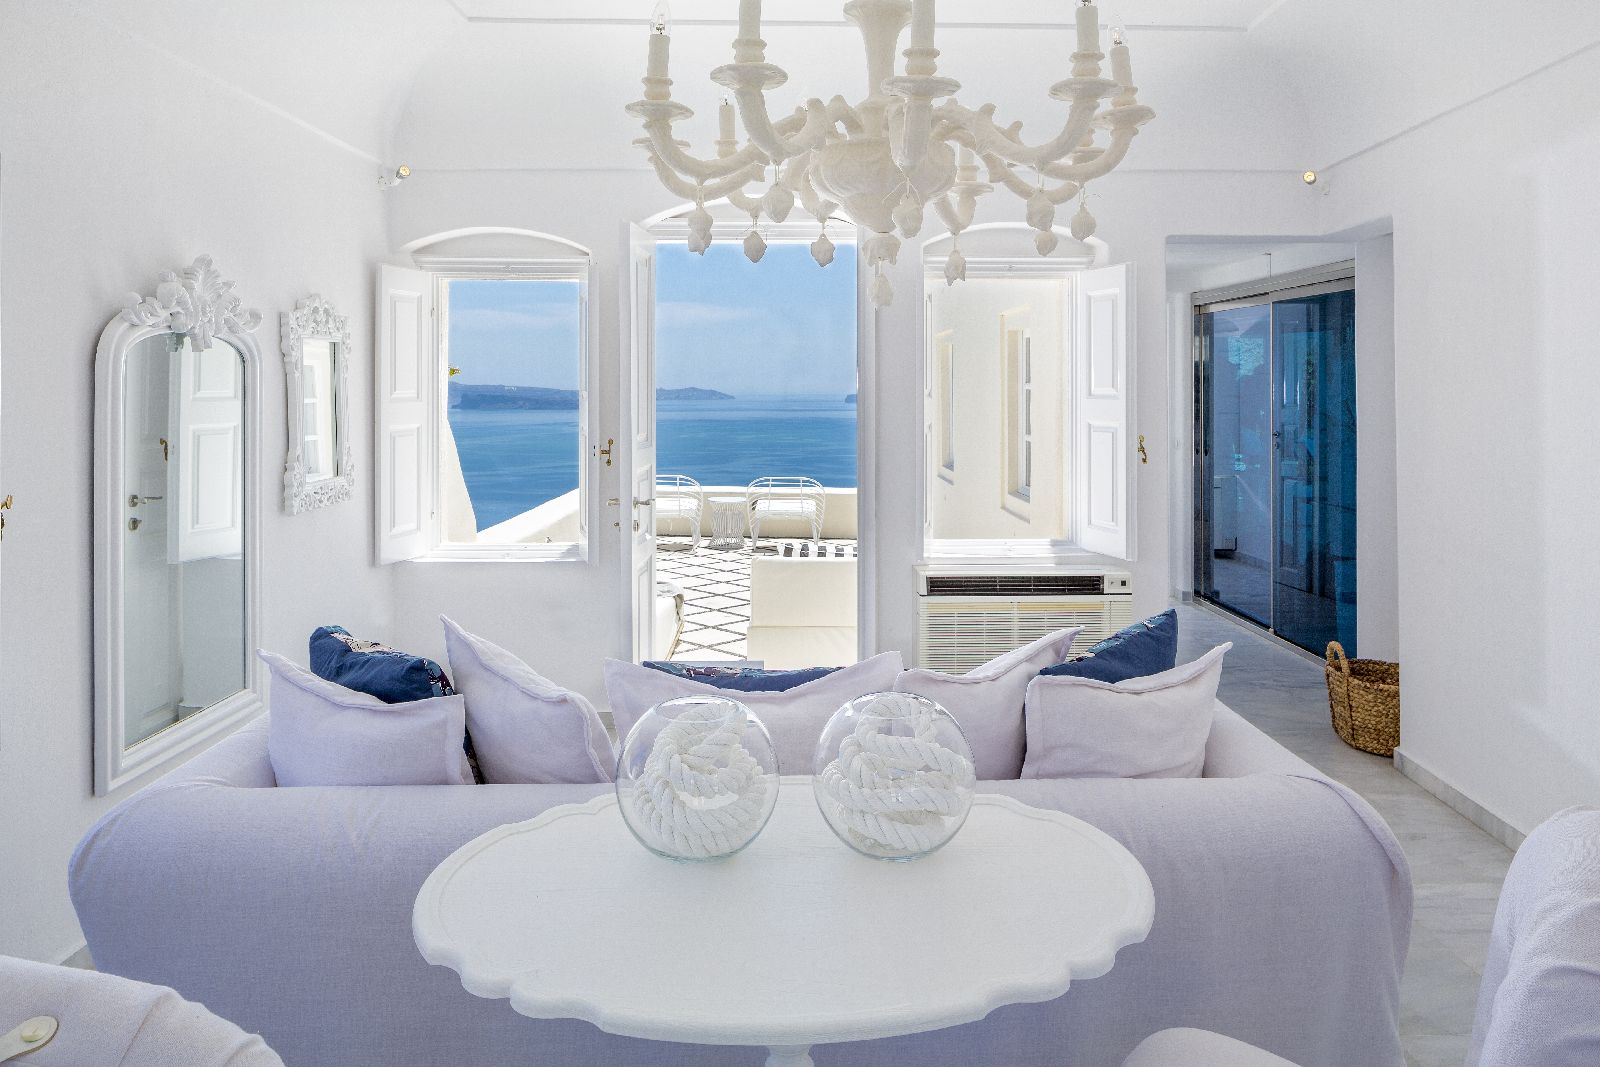 Interiors of the Presidential Suite at Canaves Oia Suites in Santorini Greece